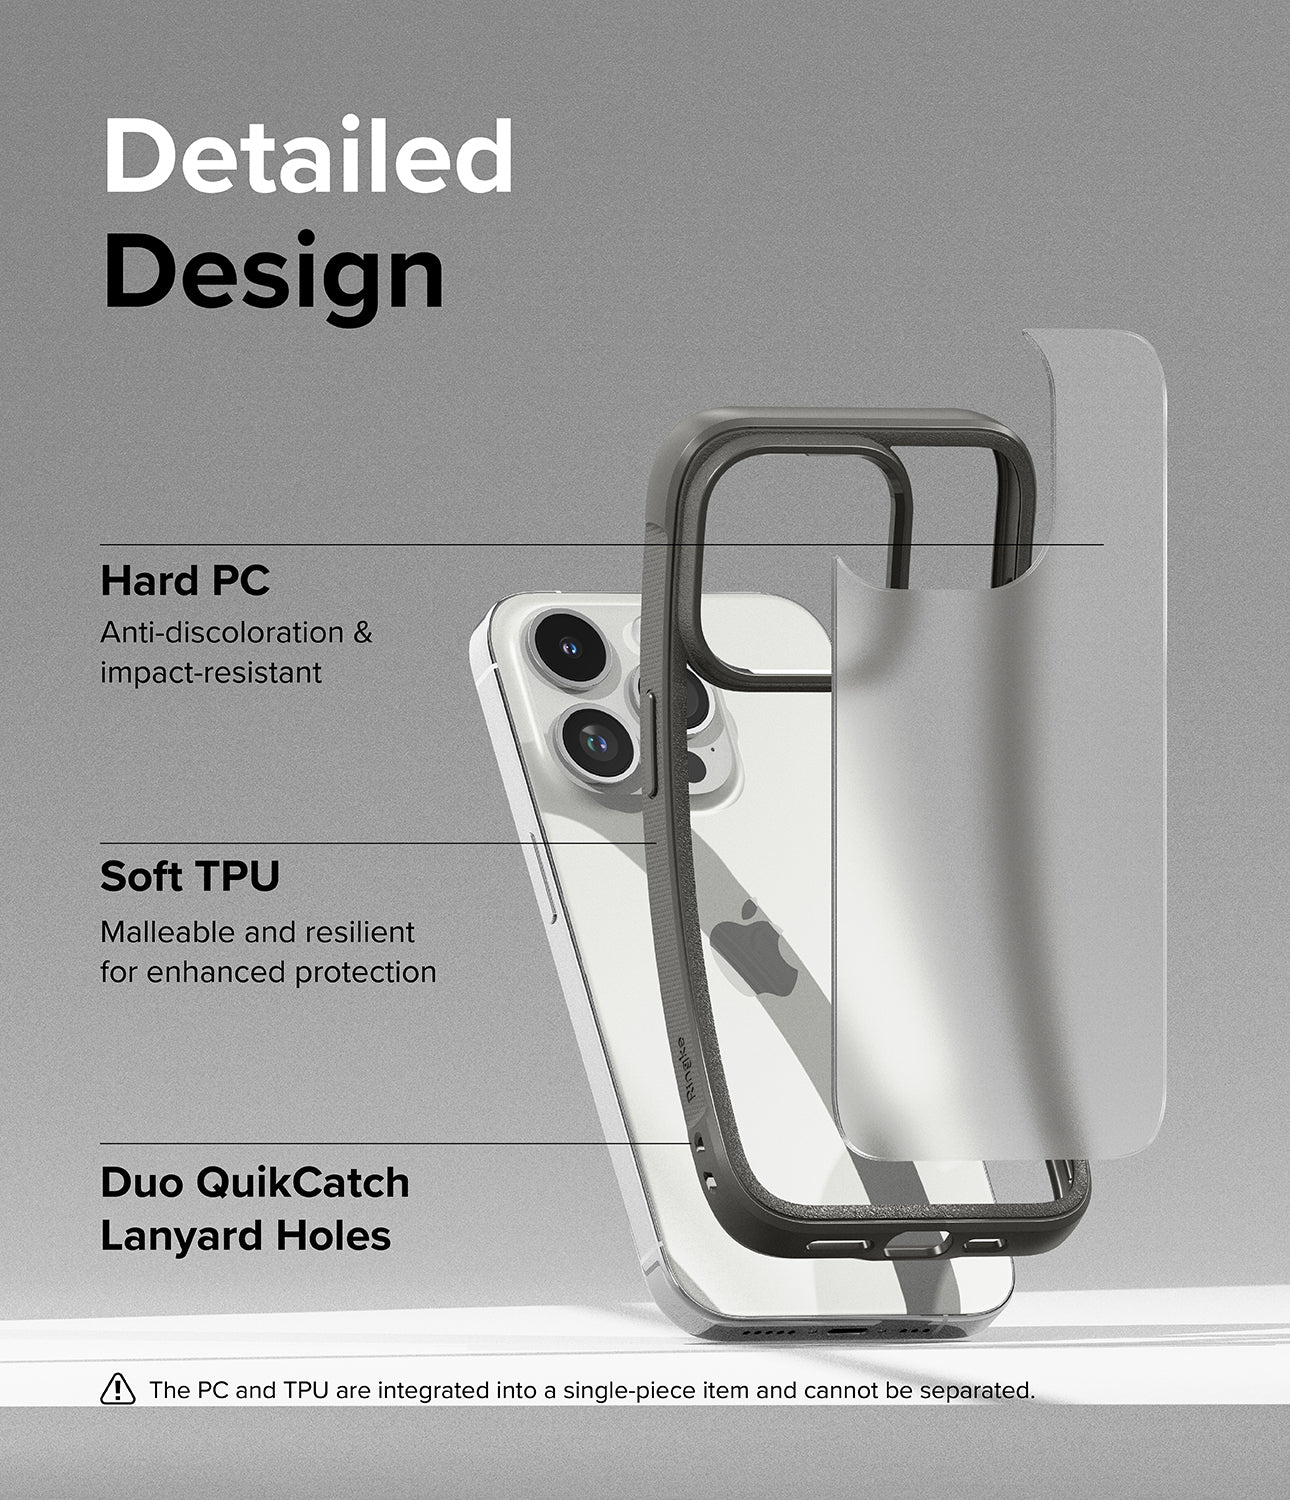 iPhone 15 Pro Max Case | Fusion Bold Matte Gray - Detailed Design. Anti-discoloration and impact-resistant with Hard PC. Malleable and resilient for enhanced protection with Soft TPU. Duo QuikCatch Lanyard Holes